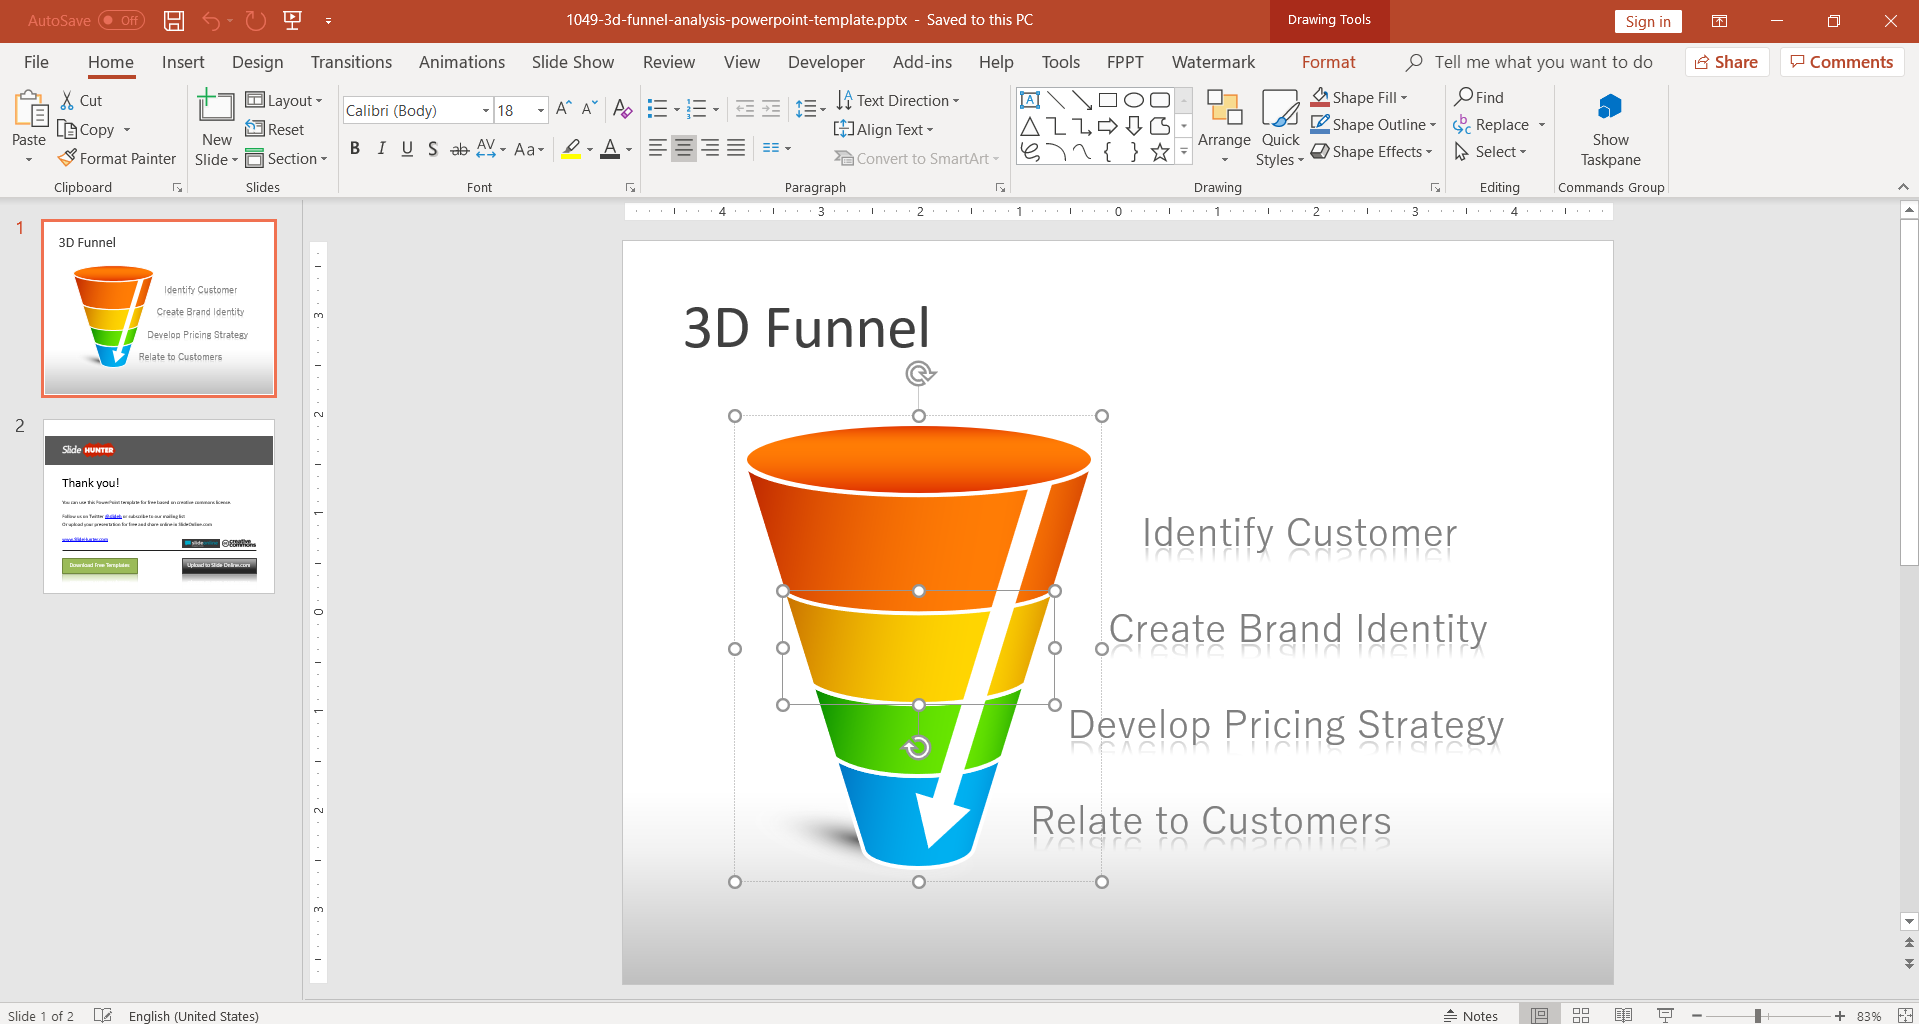 Free 11D Funnel Analysis PowerPoint Template Inside Funnel Analysis Template Regarding Funnel Analysis Template